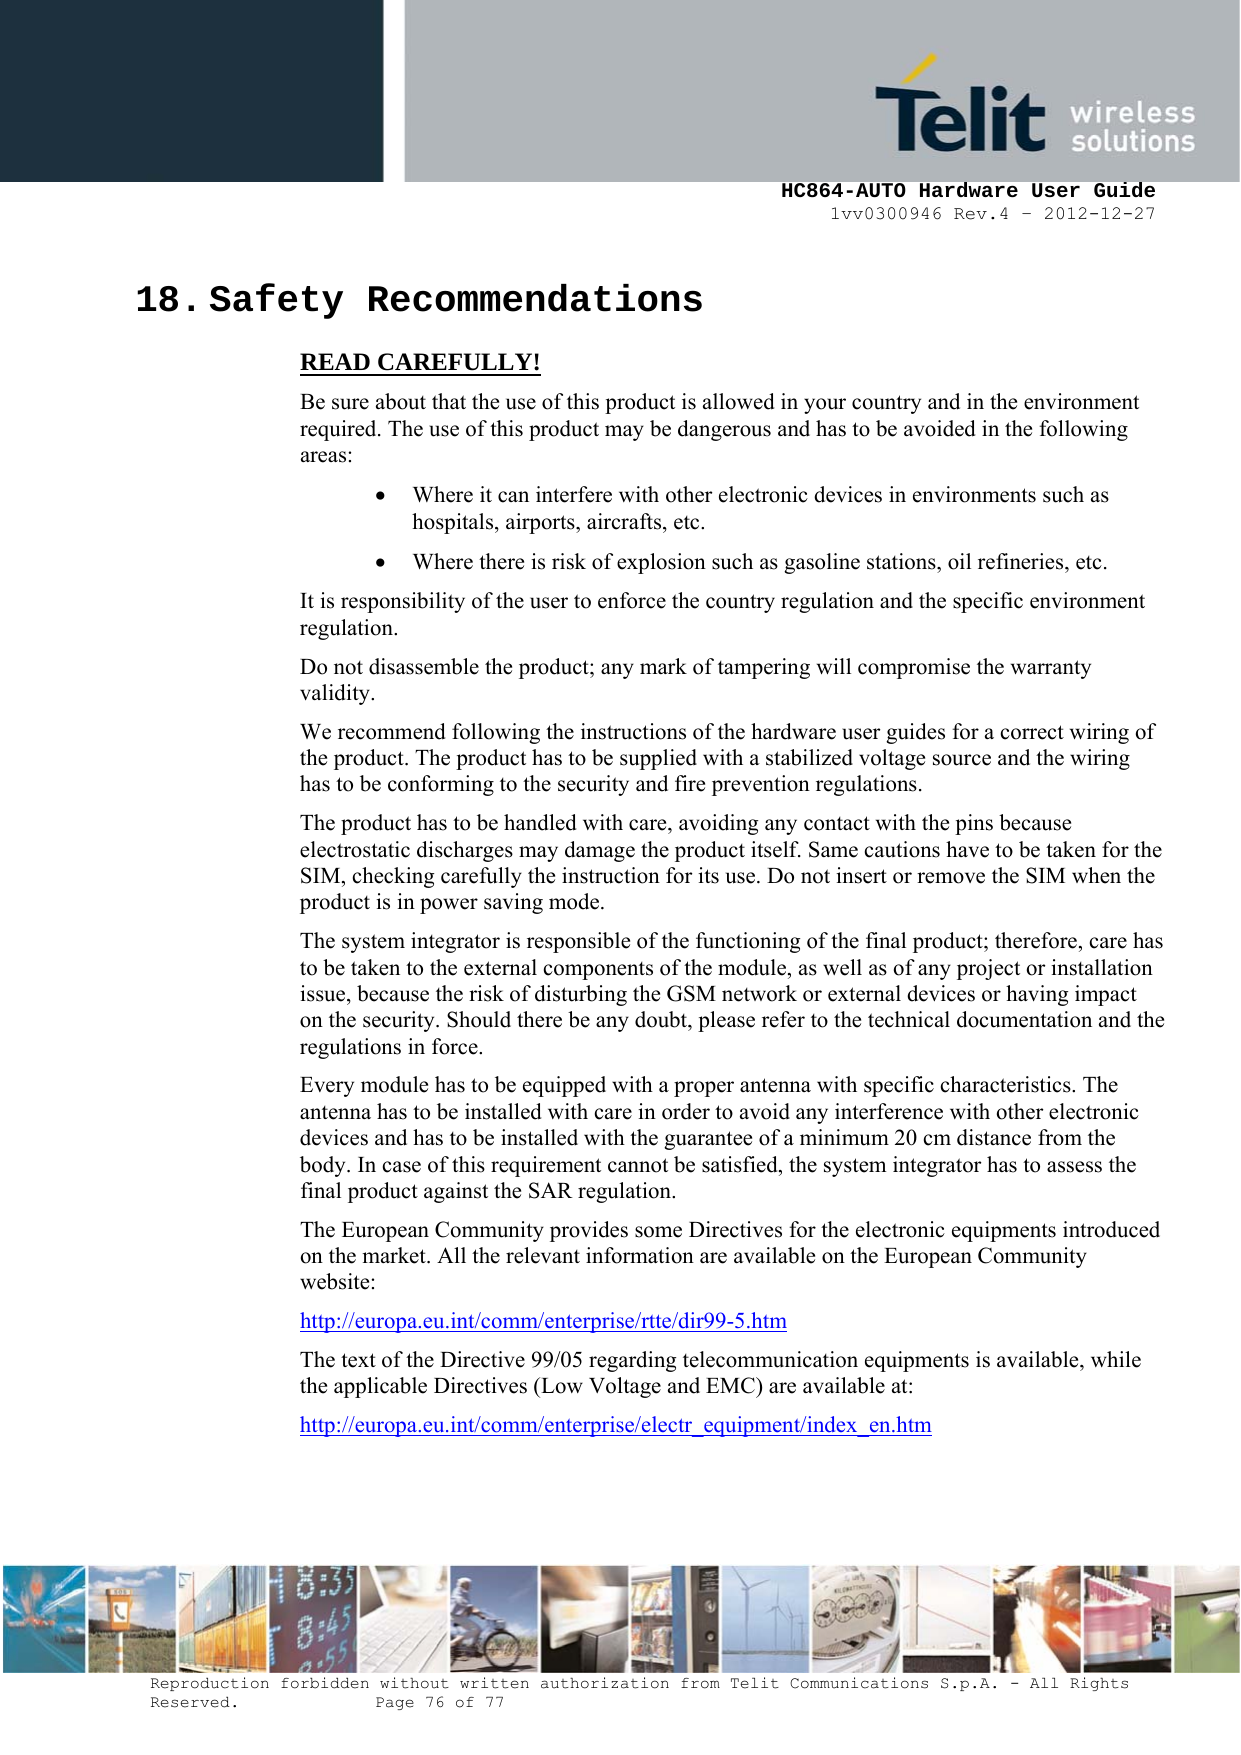     HC864-AUTO Hardware User Guide 1vv0300946 Rev.4 – 2012-12-27 Reproduction forbidden without written authorization from Telit Communications S.p.A. - All Rights Reserved.    Page 76 of 77  18. Safety Recommendations READ CAREFULLY! Be sure about that the use of this product is allowed in your country and in the environment required. The use of this product may be dangerous and has to be avoided in the following areas: • Where it can interfere with other electronic devices in environments such as hospitals, airports, aircrafts, etc. • Where there is risk of explosion such as gasoline stations, oil refineries, etc.  It is responsibility of the user to enforce the country regulation and the specific environment regulation. Do not disassemble the product; any mark of tampering will compromise the warranty validity. We recommend following the instructions of the hardware user guides for a correct wiring of the product. The product has to be supplied with a stabilized voltage source and the wiring has to be conforming to the security and fire prevention regulations. The product has to be handled with care, avoiding any contact with the pins because electrostatic discharges may damage the product itself. Same cautions have to be taken for the SIM, checking carefully the instruction for its use. Do not insert or remove the SIM when the product is in power saving mode. The system integrator is responsible of the functioning of the final product; therefore, care has to be taken to the external components of the module, as well as of any project or installation issue, because the risk of disturbing the GSM network or external devices or having impact on the security. Should there be any doubt, please refer to the technical documentation and the regulations in force. Every module has to be equipped with a proper antenna with specific characteristics. The antenna has to be installed with care in order to avoid any interference with other electronic devices and has to be installed with the guarantee of a minimum 20 cm distance from the body. In case of this requirement cannot be satisfied, the system integrator has to assess the final product against the SAR regulation. The European Community provides some Directives for the electronic equipments introduced on the market. All the relevant information are available on the European Community website: http://europa.eu.int/comm/enterprise/rtte/dir99-5.htm The text of the Directive 99/05 regarding telecommunication equipments is available, while the applicable Directives (Low Voltage and EMC) are available at: http://europa.eu.int/comm/enterprise/electr_equipment/index_en.htm  